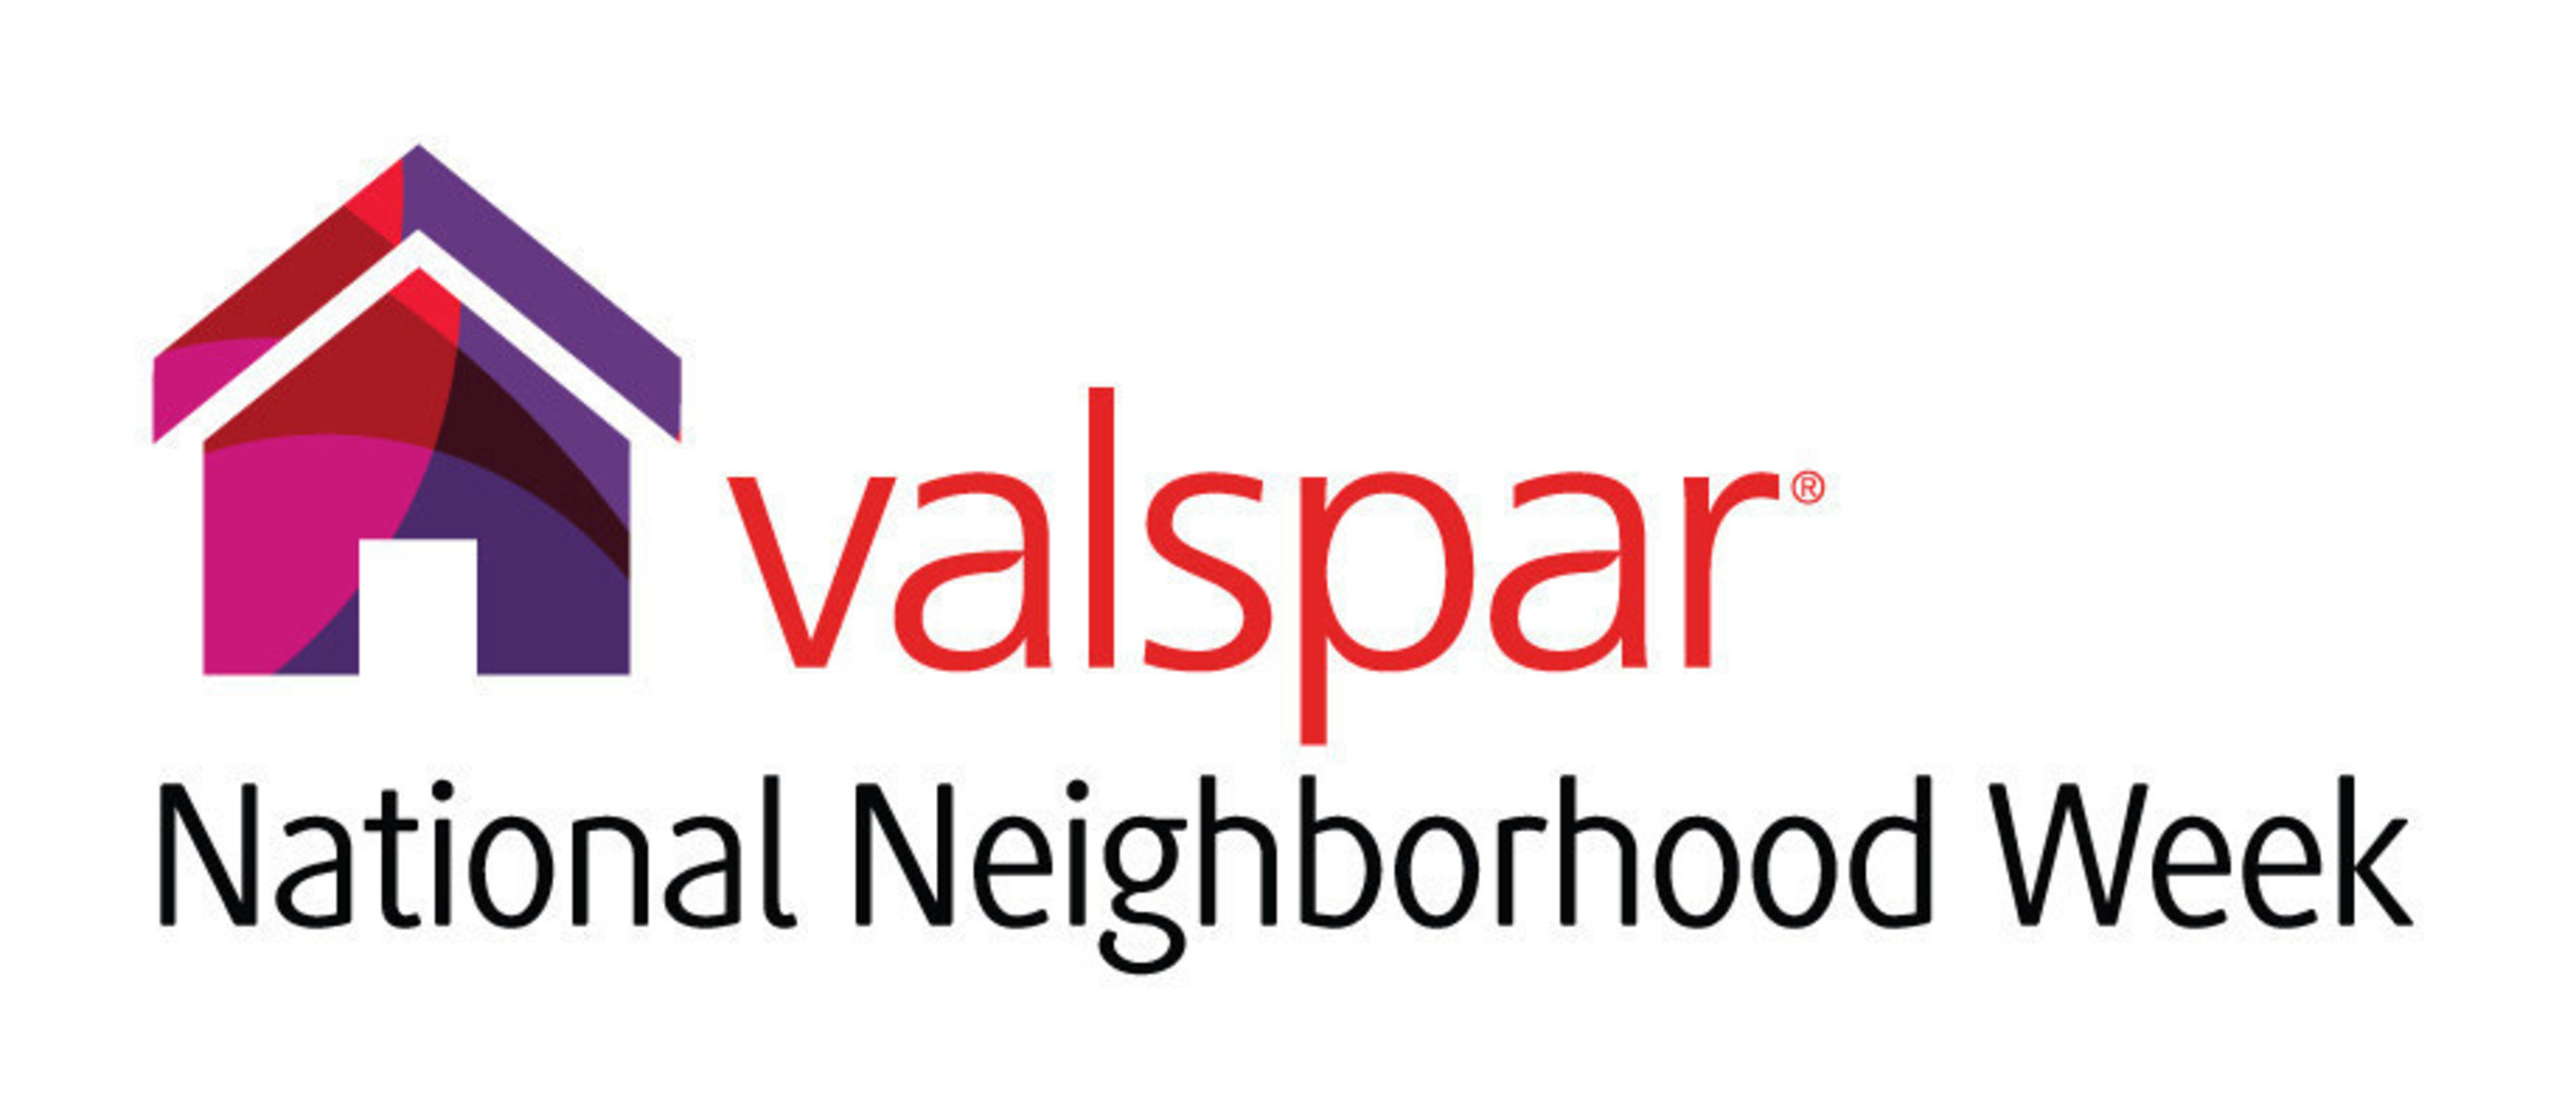 Valspar has provided $2.5 million in cash and product donations to support 51 local Habitat for Humanity organizations in 16 states as part of Valspar's National Neighborhood Week, May 9 - 14, 2016.  Every Valspar site in the United States will be activating volunteer teams during National Neighborhood Week to work on Habitat home builds and A Brush With Kindness projects.  #myroll